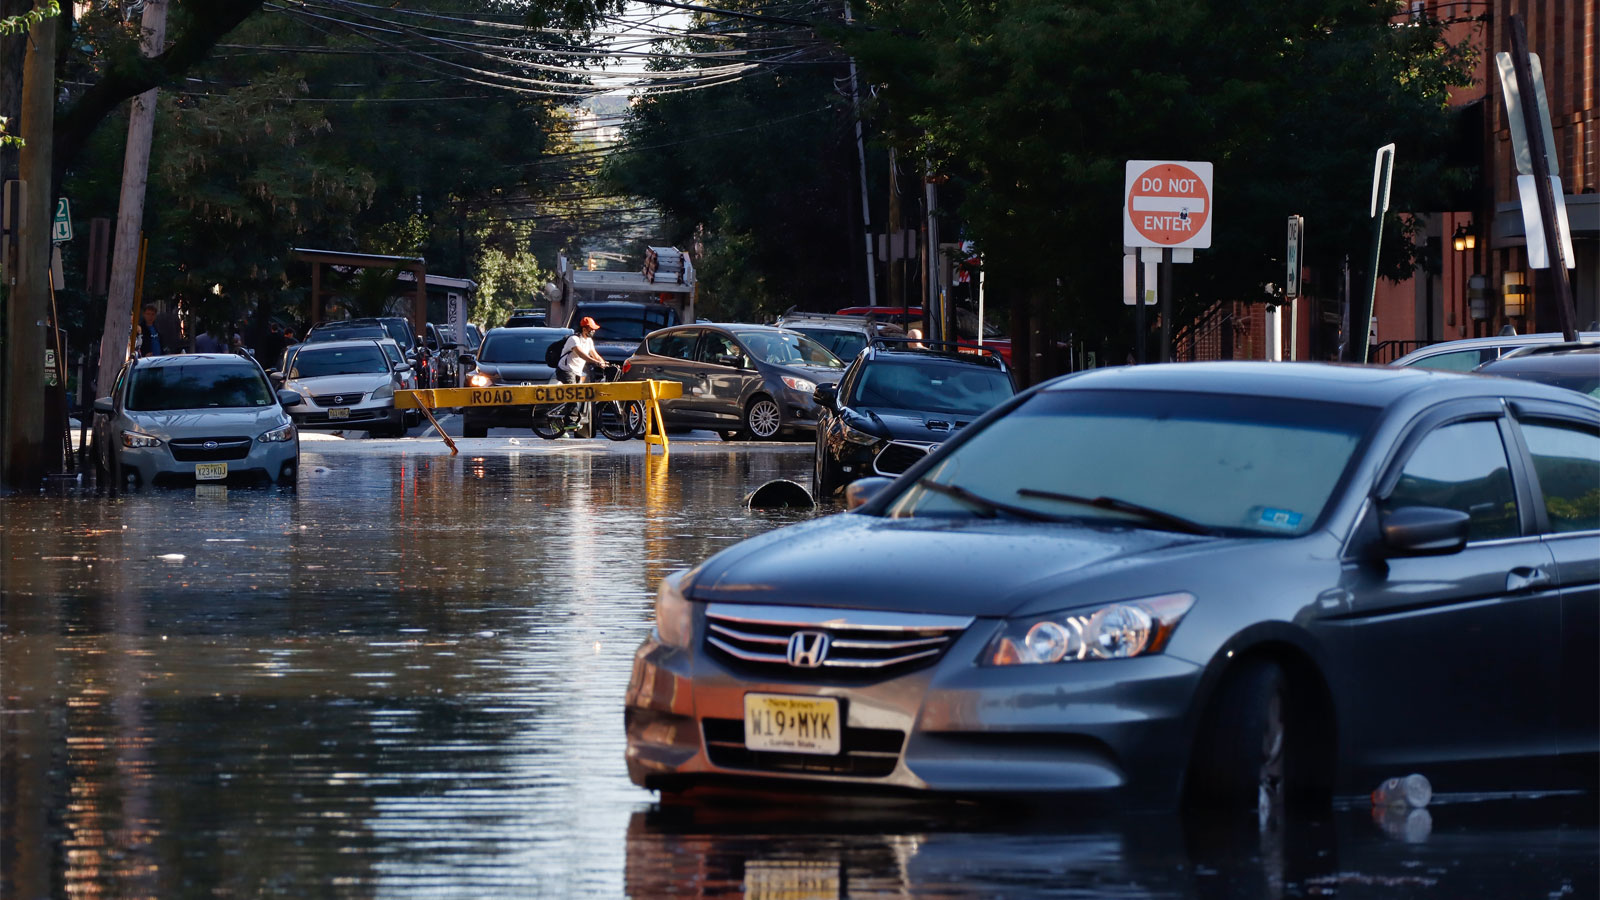 An abandoned car sits on a flooded street in Hoboken, New Jersey